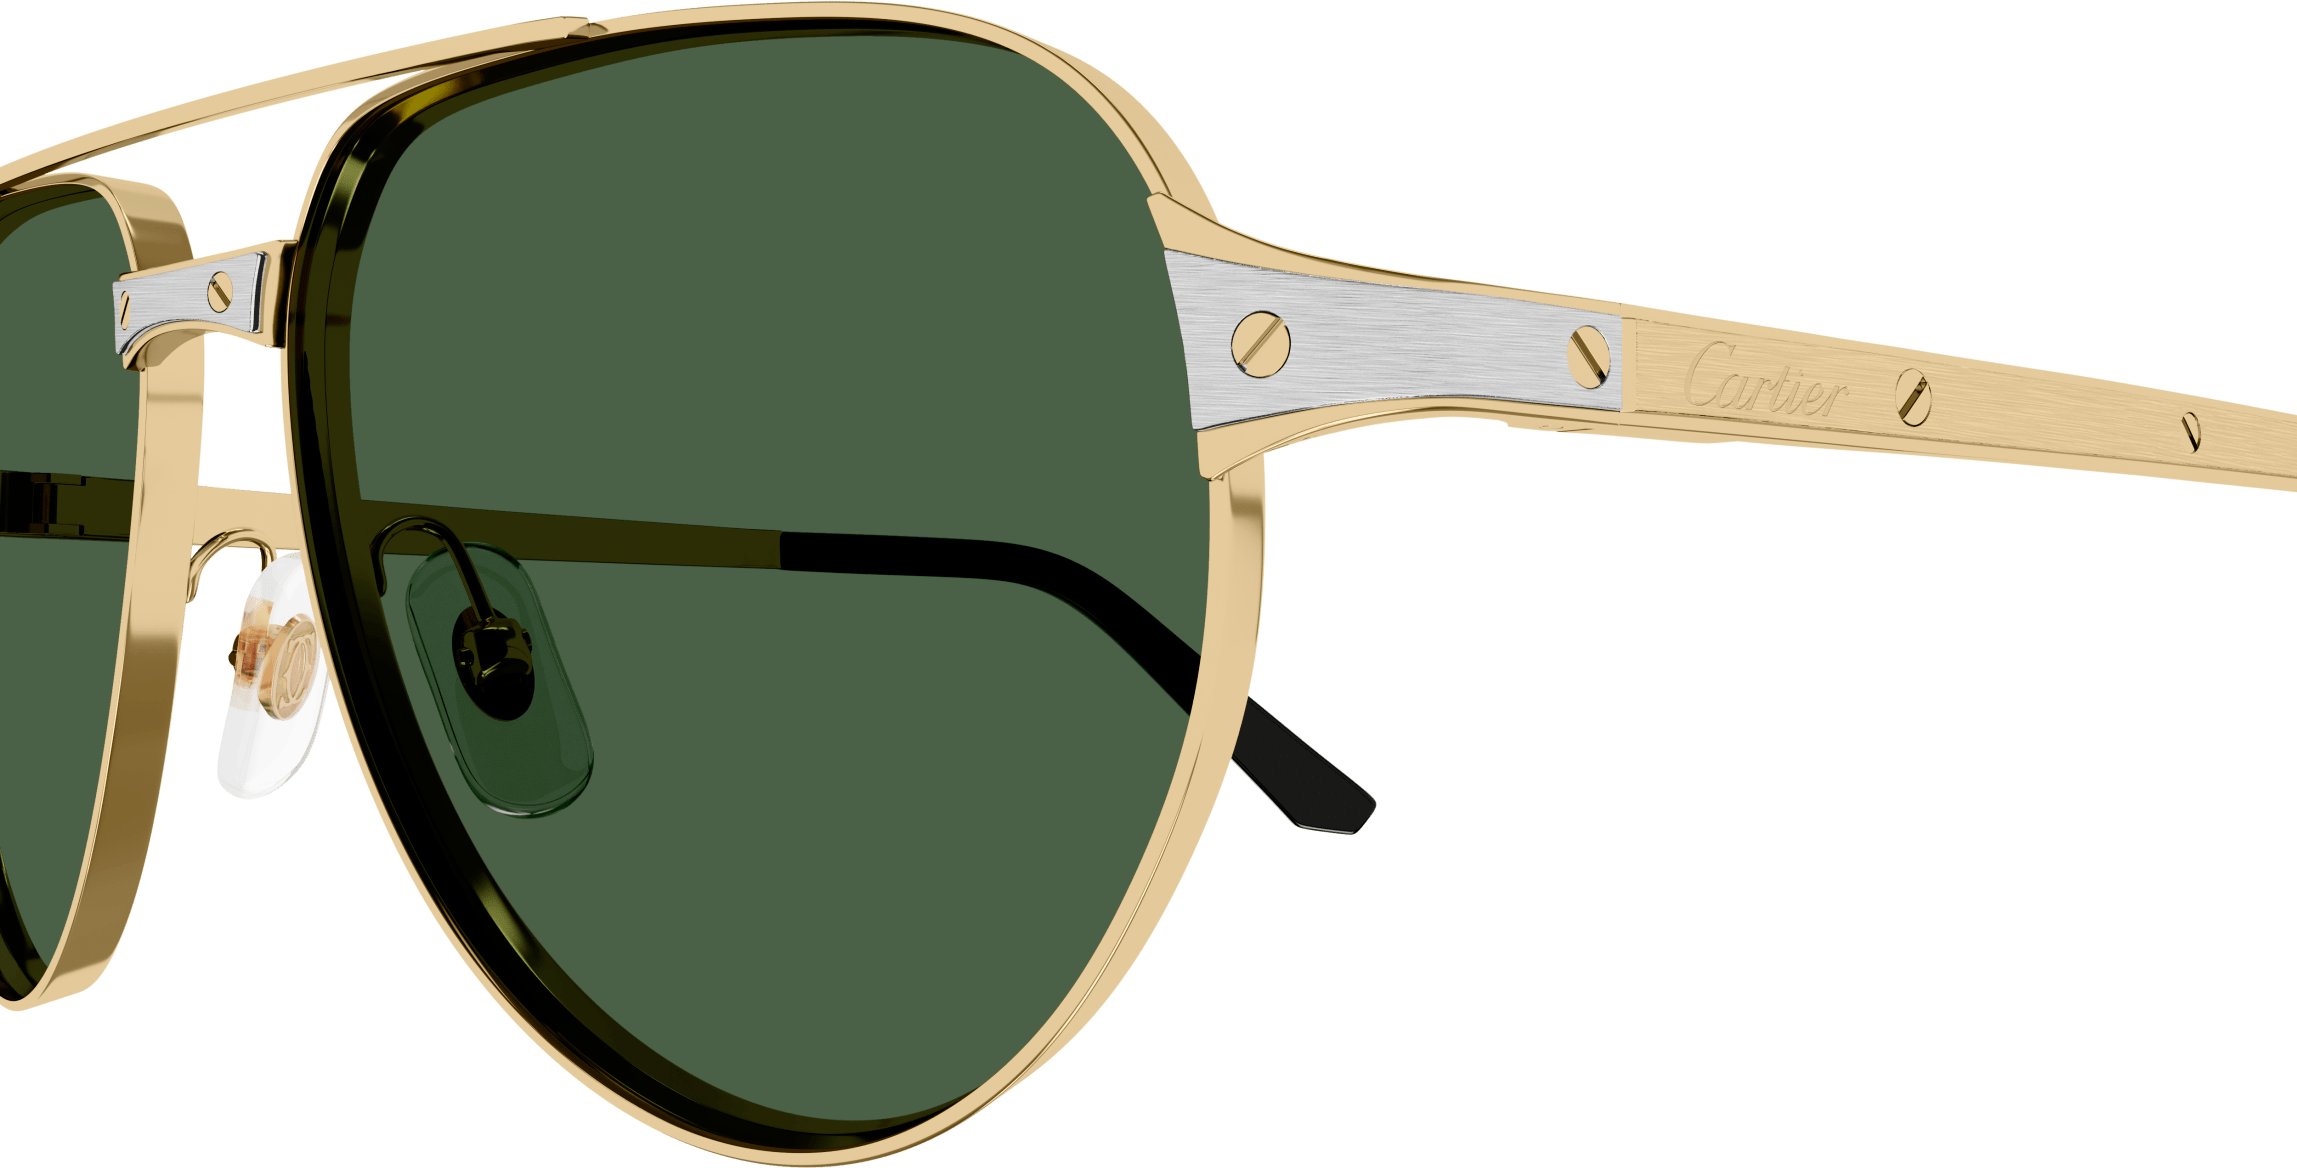 Color_CT0425S-002 - GOLD - GREEN - AR (ANTI REFLECTIVE) - POLARIZED